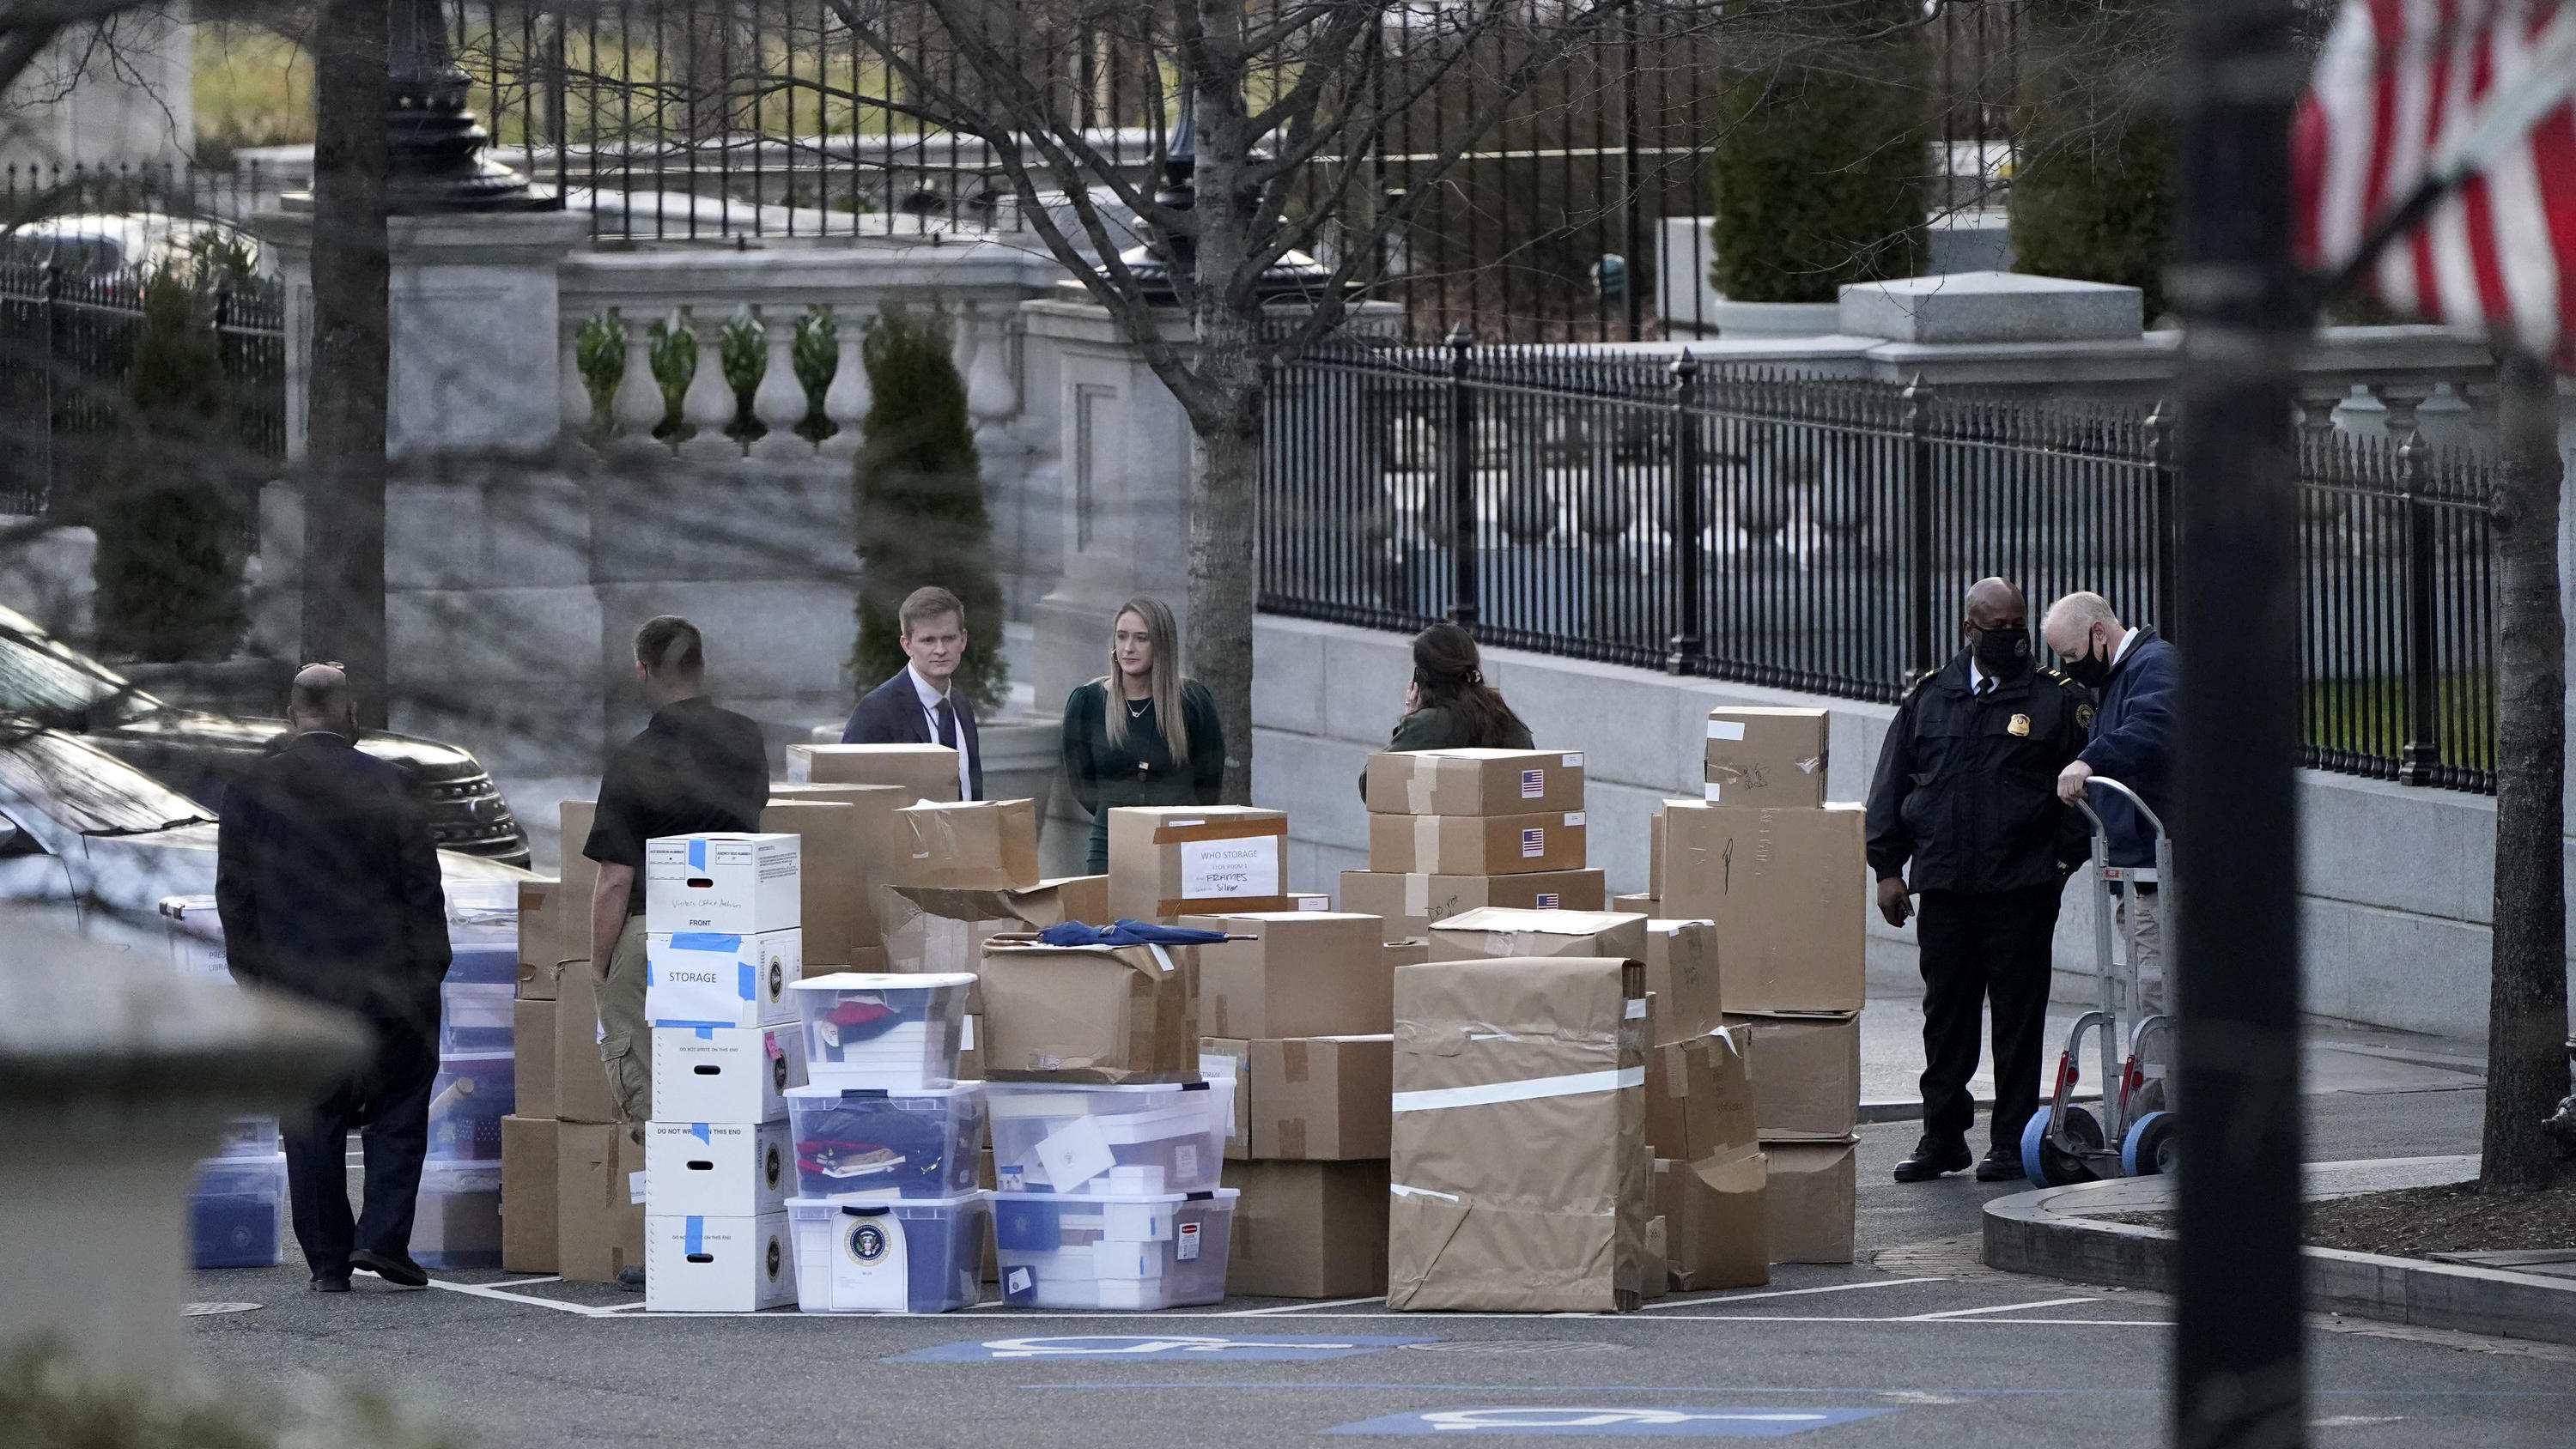 FILE - In this Jan. 14, 2021, file photo people wait for a moving van after boxes were moved out of the Eisenhower Executive Office building inside the White House complex in Washington. The public wonâ€™t see President Donald Trumpâ€™s White House r